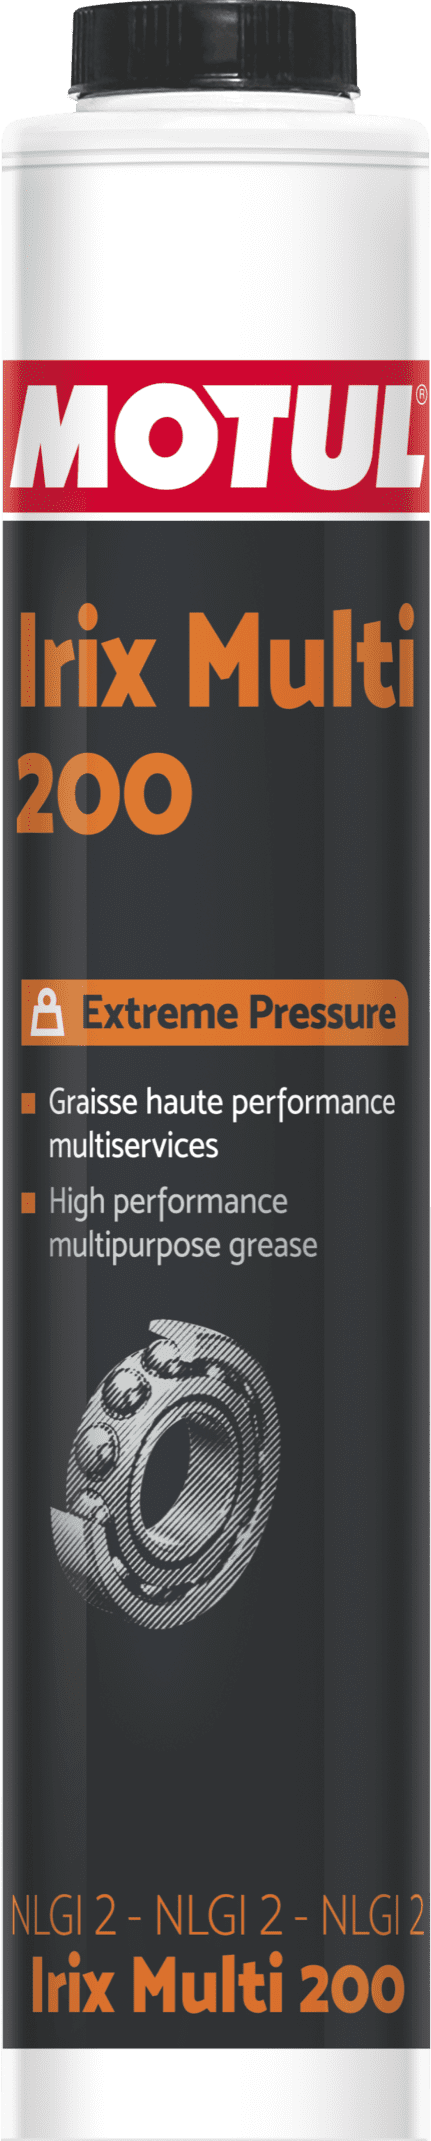 108672-400GR High performance multipurpose grease recommended for the lubrication of roller bearings, plain bearings, thrust bearings, gears, electric motors, winches, bushings, wheel bearings, universal joints, ball joints, chassis lubrication in heavy- and light-duty, automobiles, landscaping, agricultural, motorcycle and powersports equipment operating under normal to severe conditions.